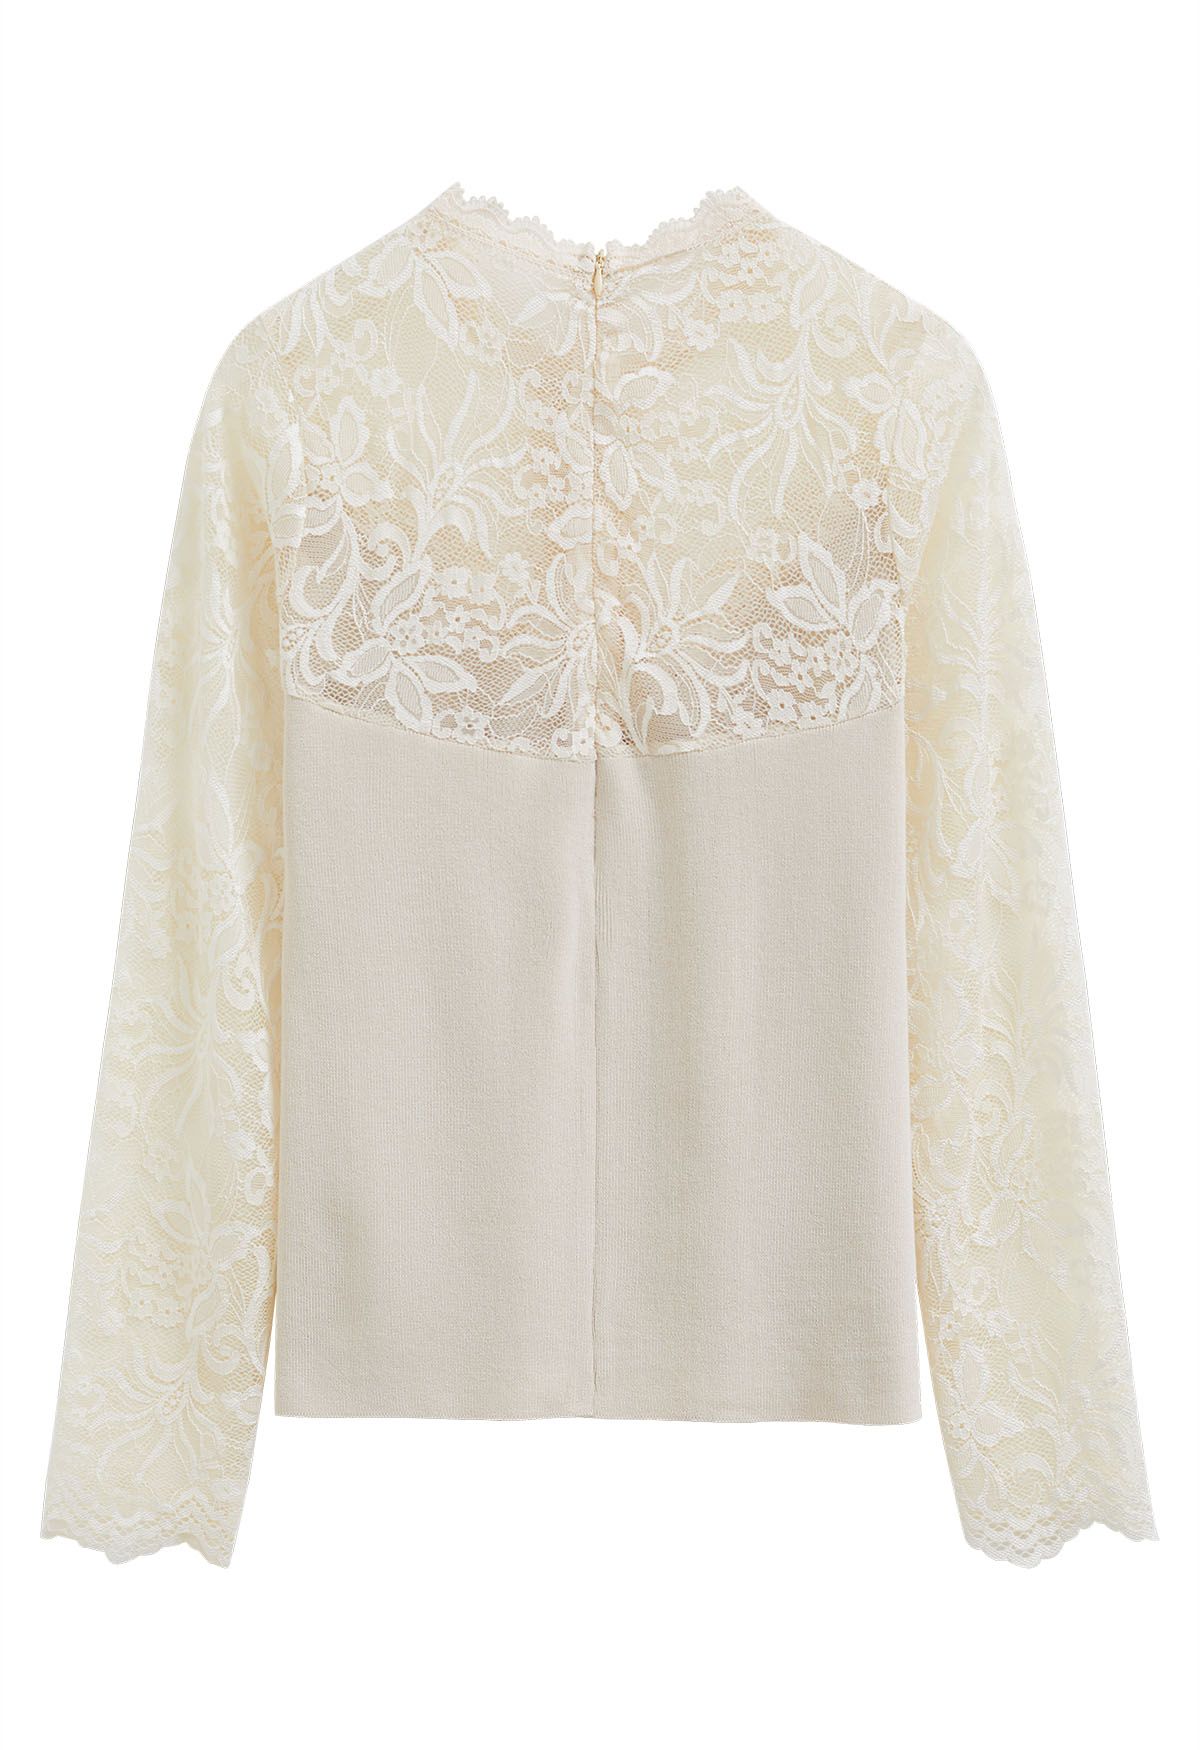 Ethereal Floral Lace Spliced Knit Top in Cream - Retro, Indie and ...